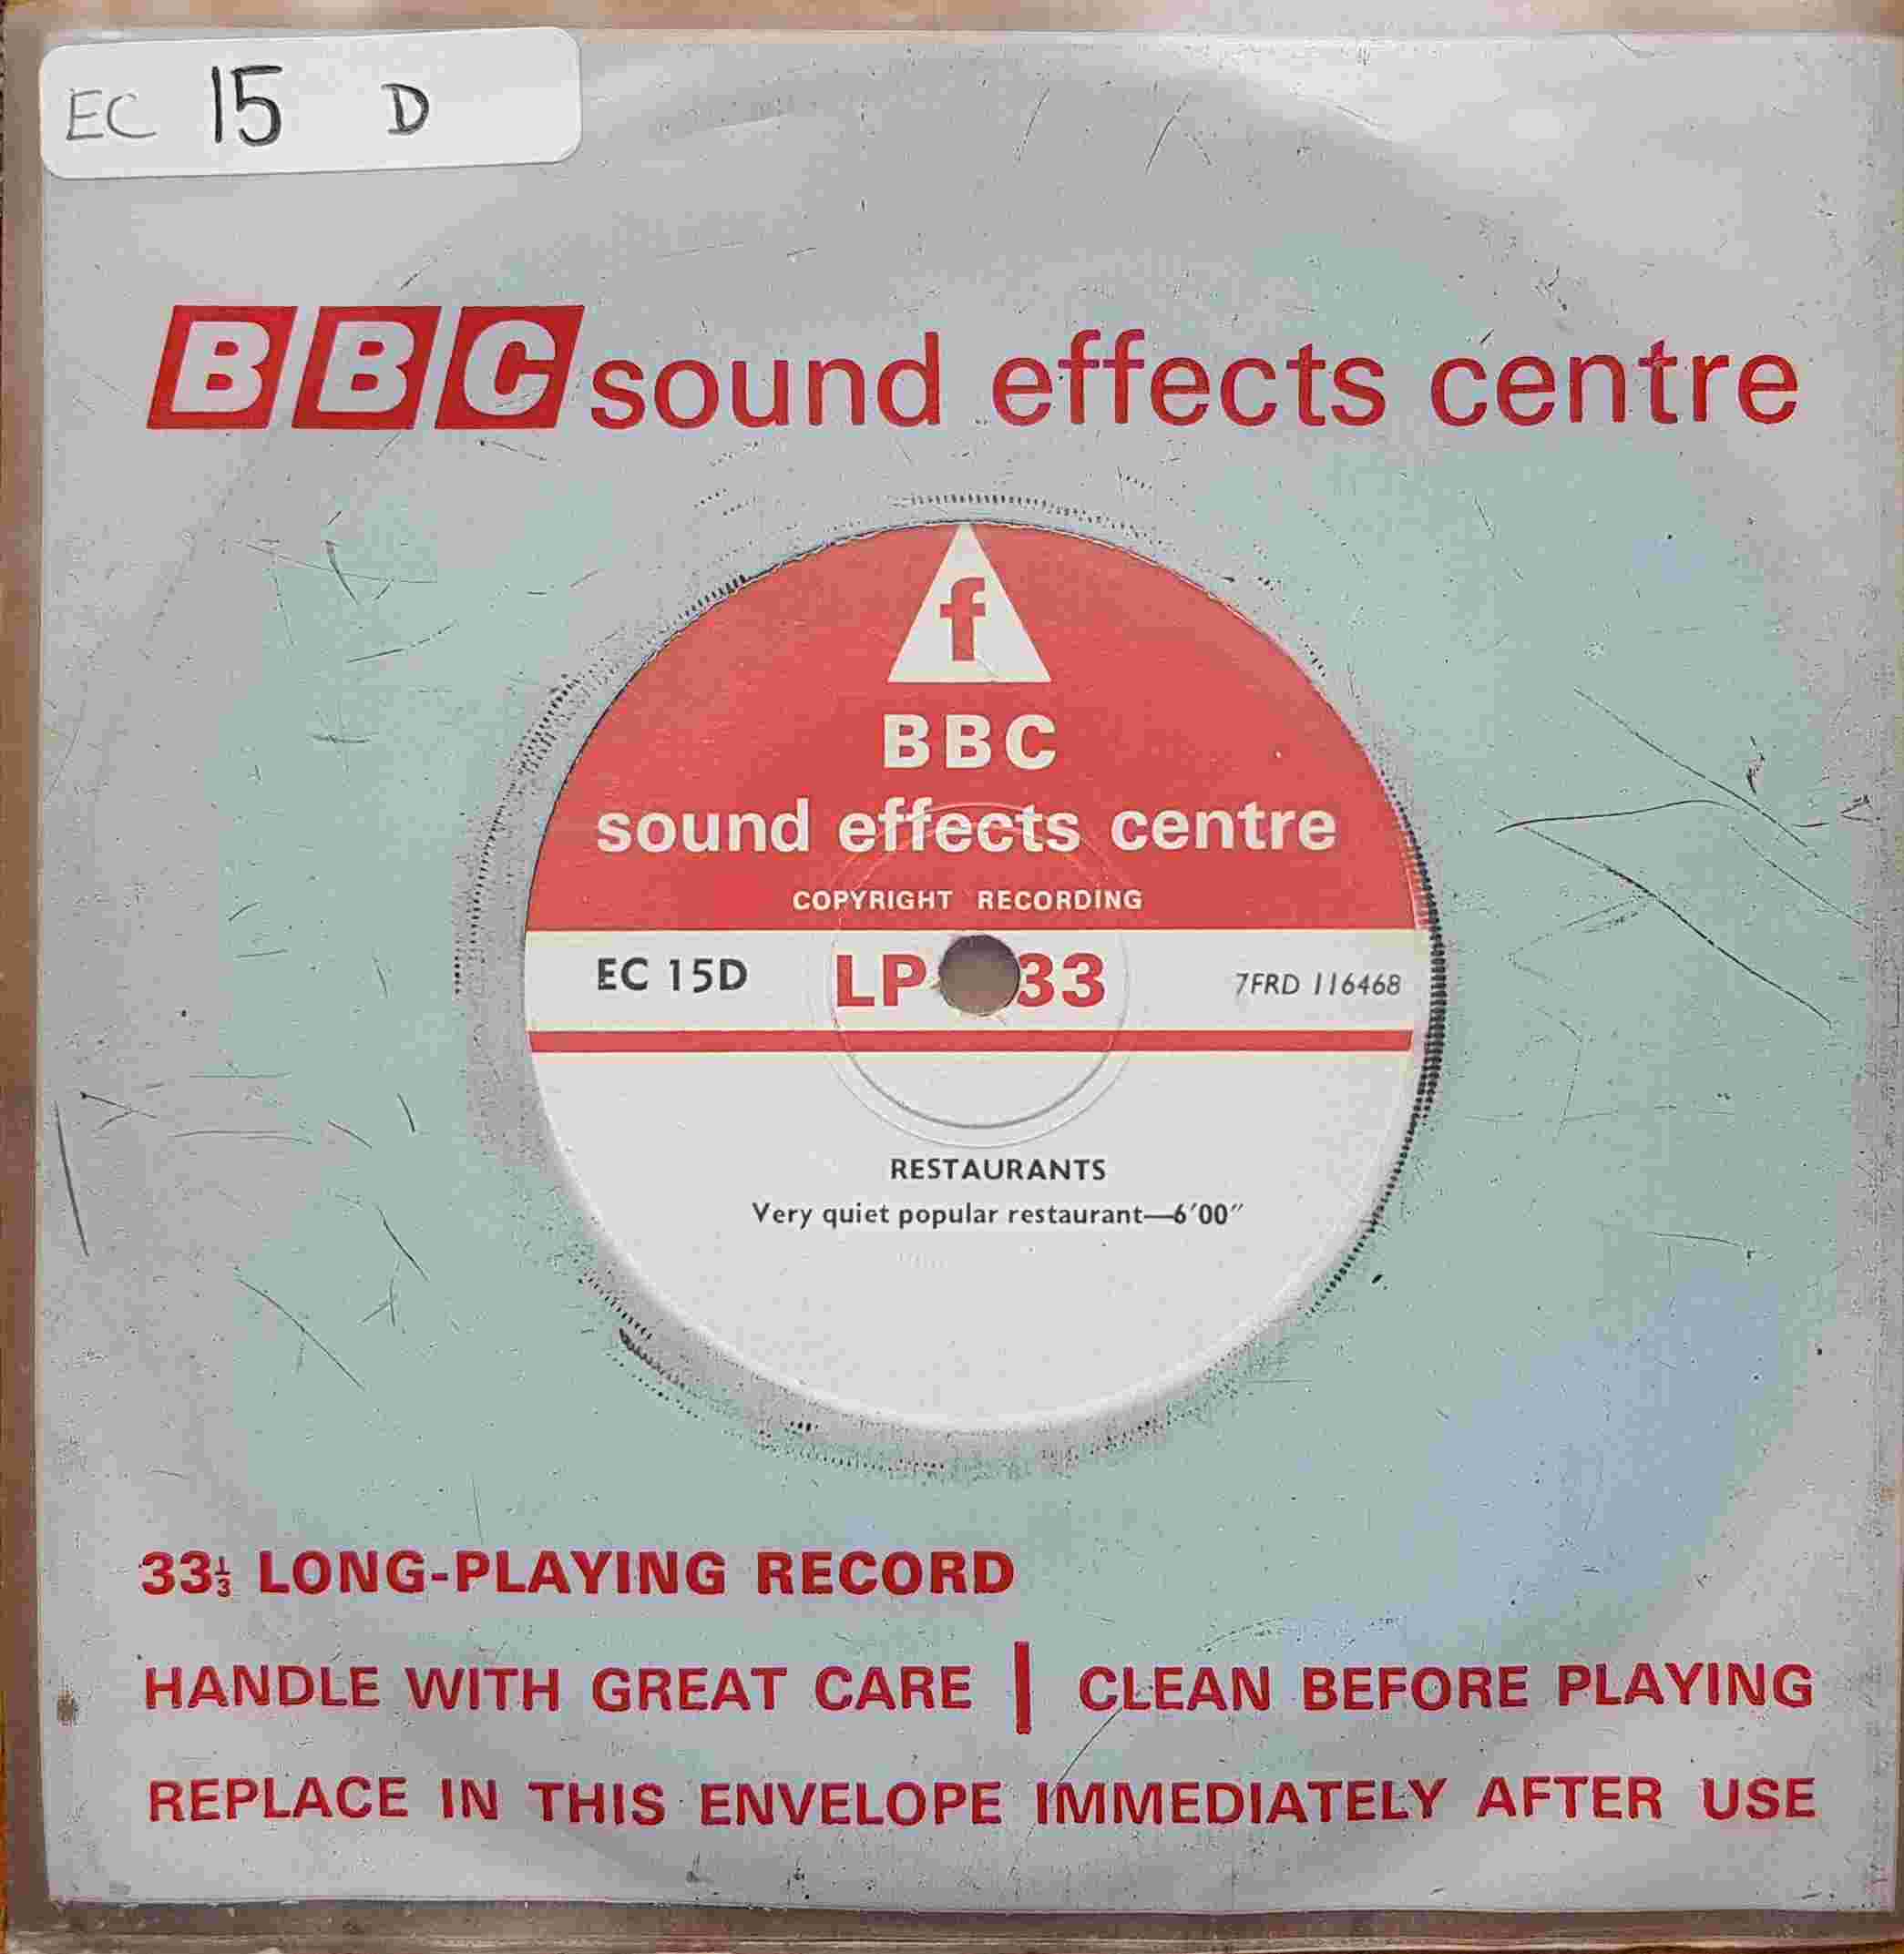 Picture of EC 15D Restaurants by artist Not registered from the BBC singles - Records and Tapes library